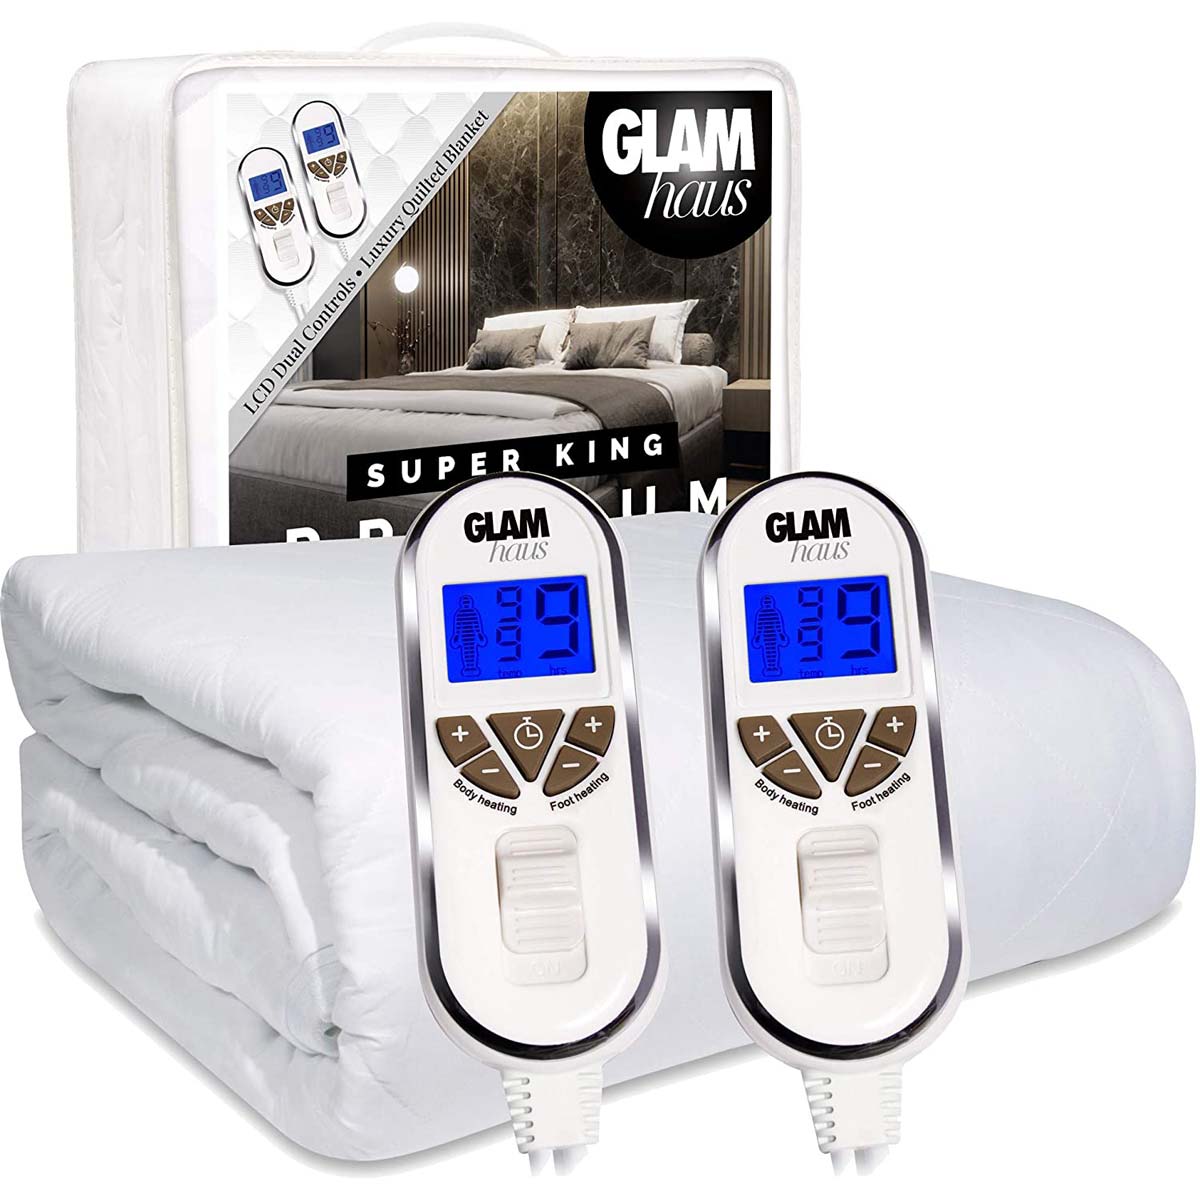 Glam Haus Glamhaus Super King Size Electric Blanket - Fitted Mattress Bed Cover - White Premium Diamond-quilted